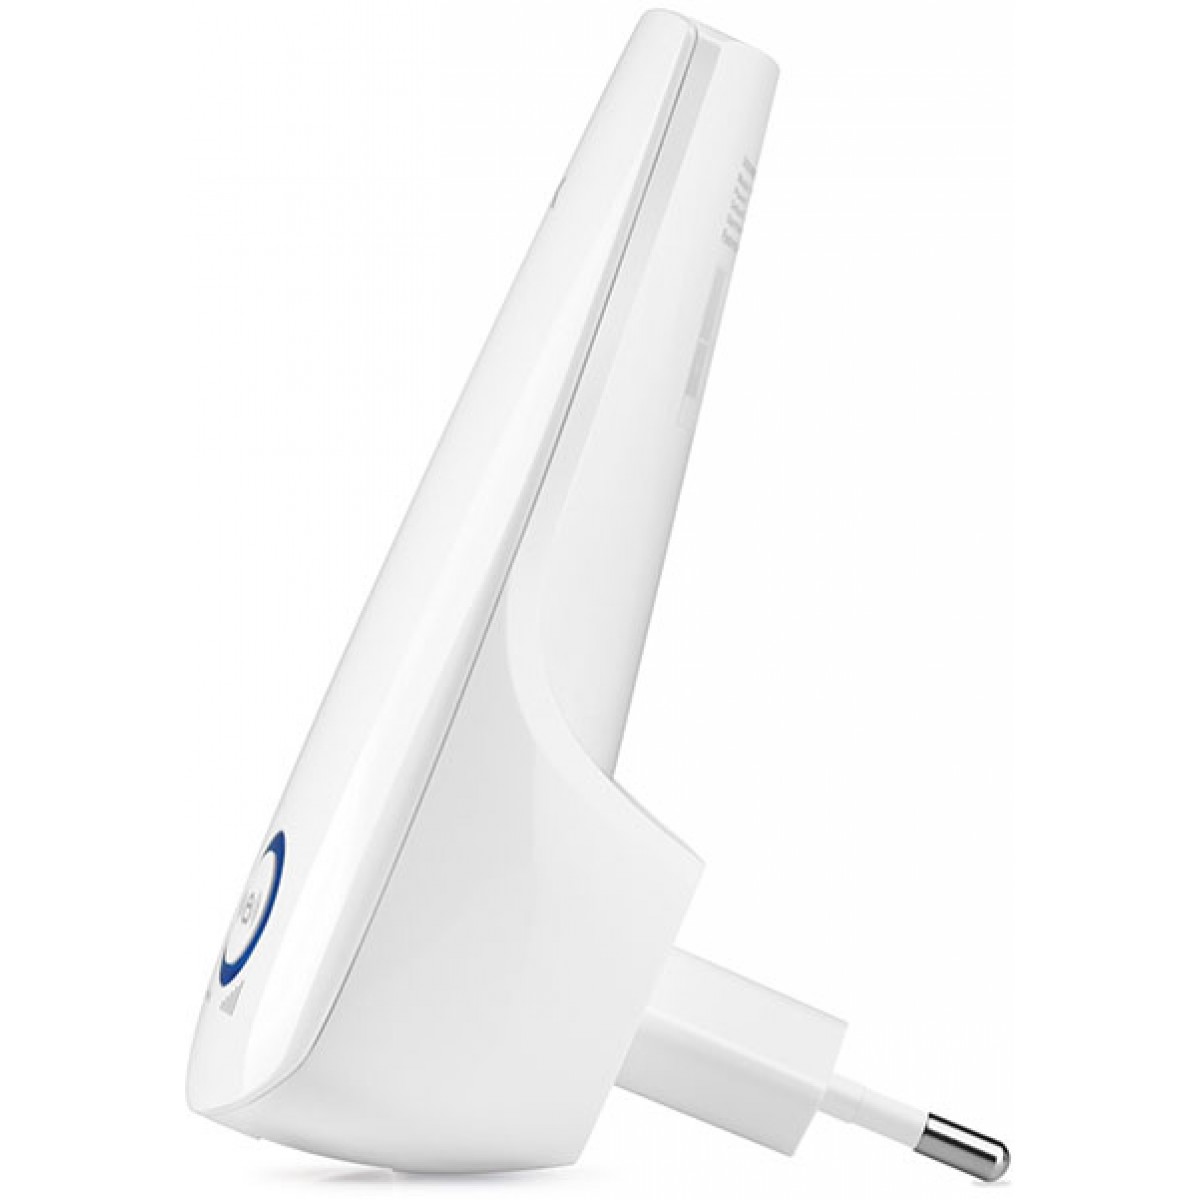 Repetidor Expansor TP-Link Wi-Fi Network 300Mbps, TL-WA850RE